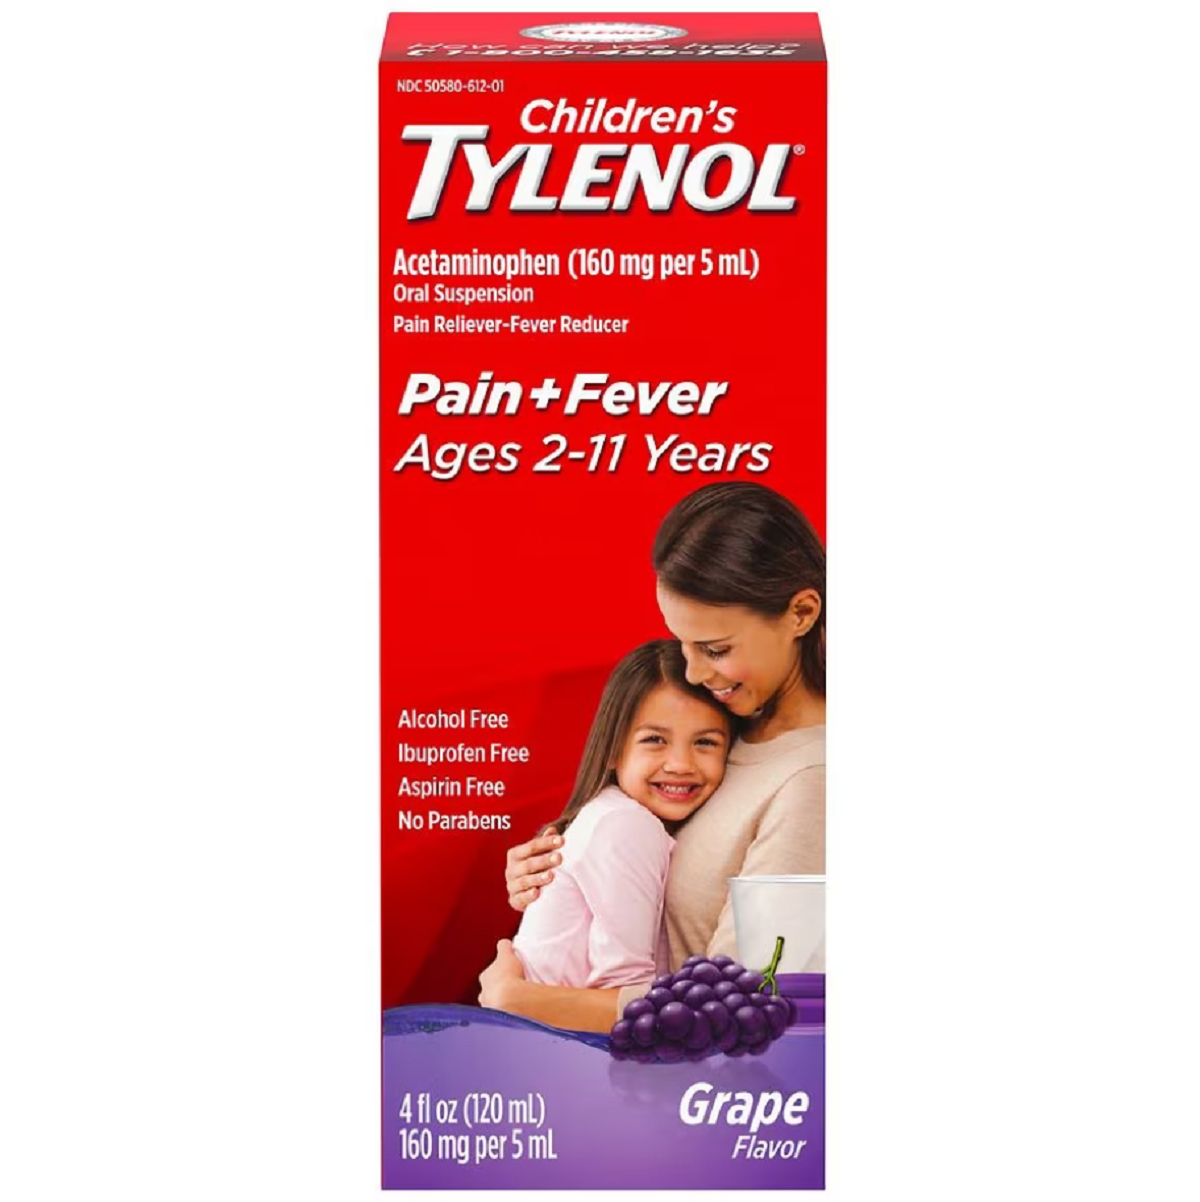 $2 Off Any (1) Children’s/Infants’ Tylenol or Motrin Product Coupon